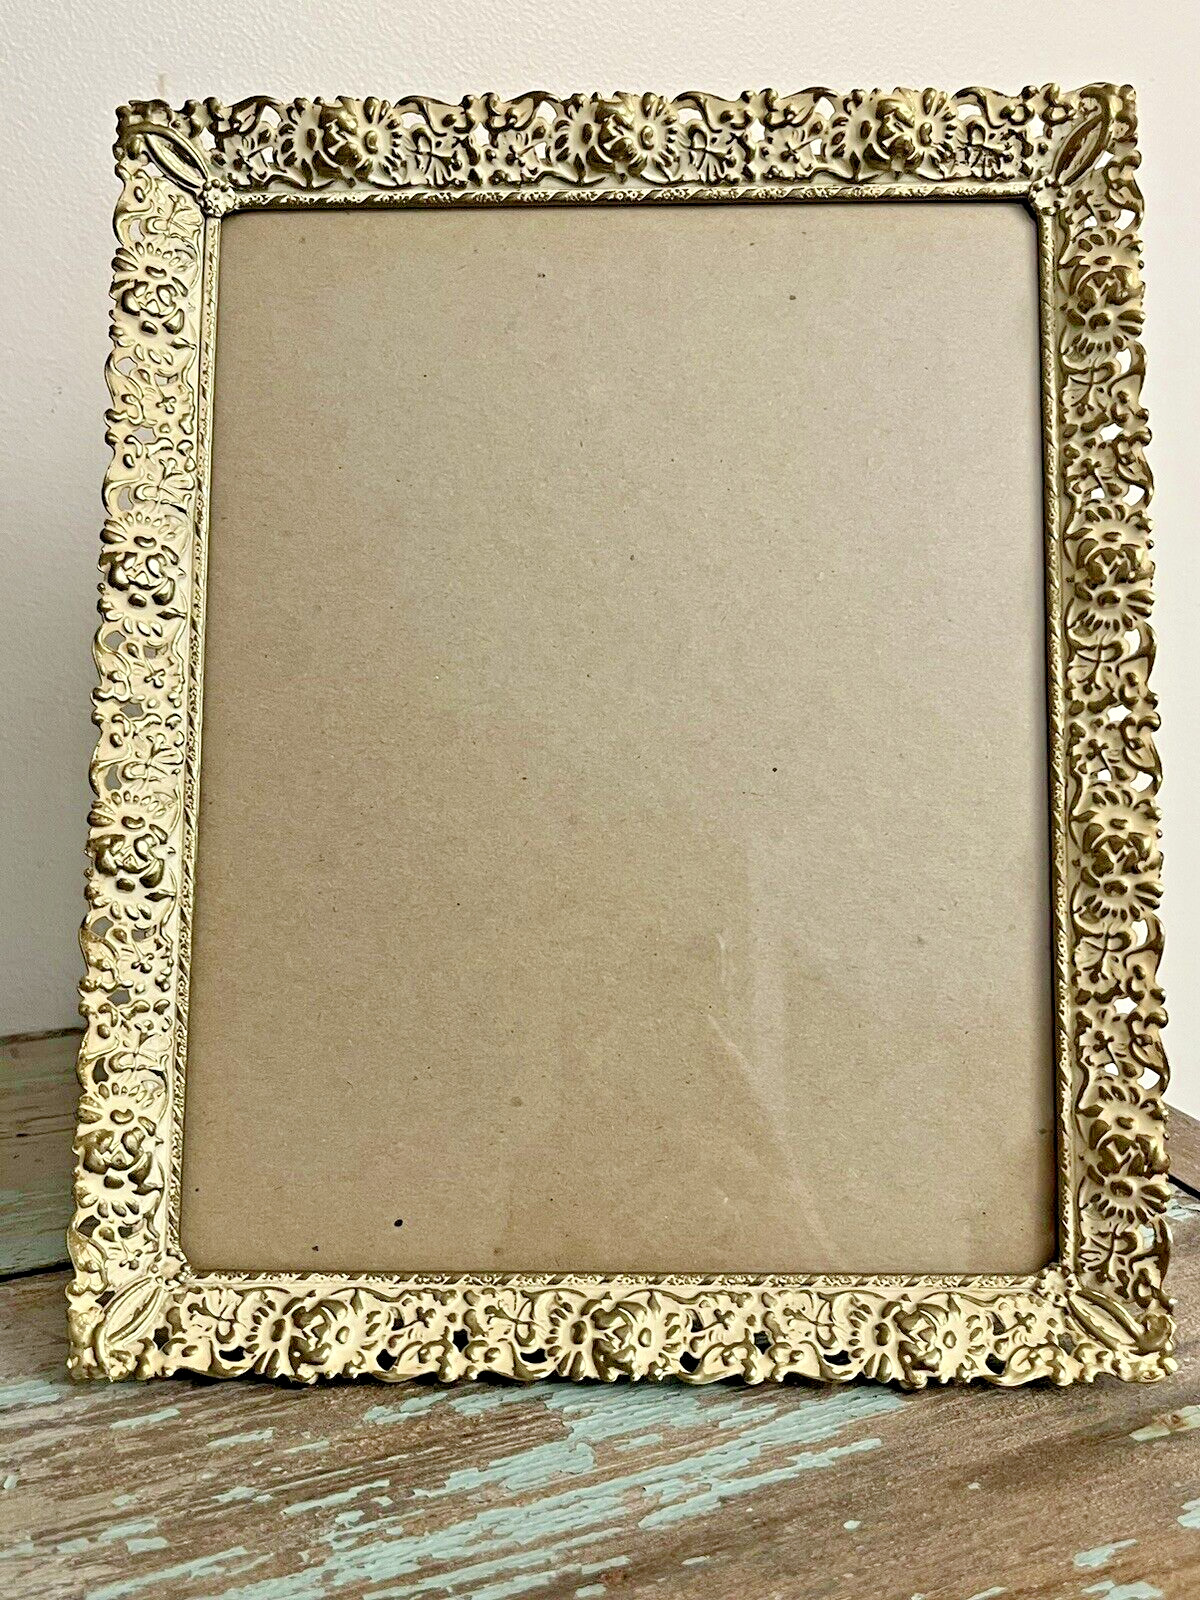 Vintage Picture Frame 8x10 Gold White Metal Ornate Tabletop Hanging